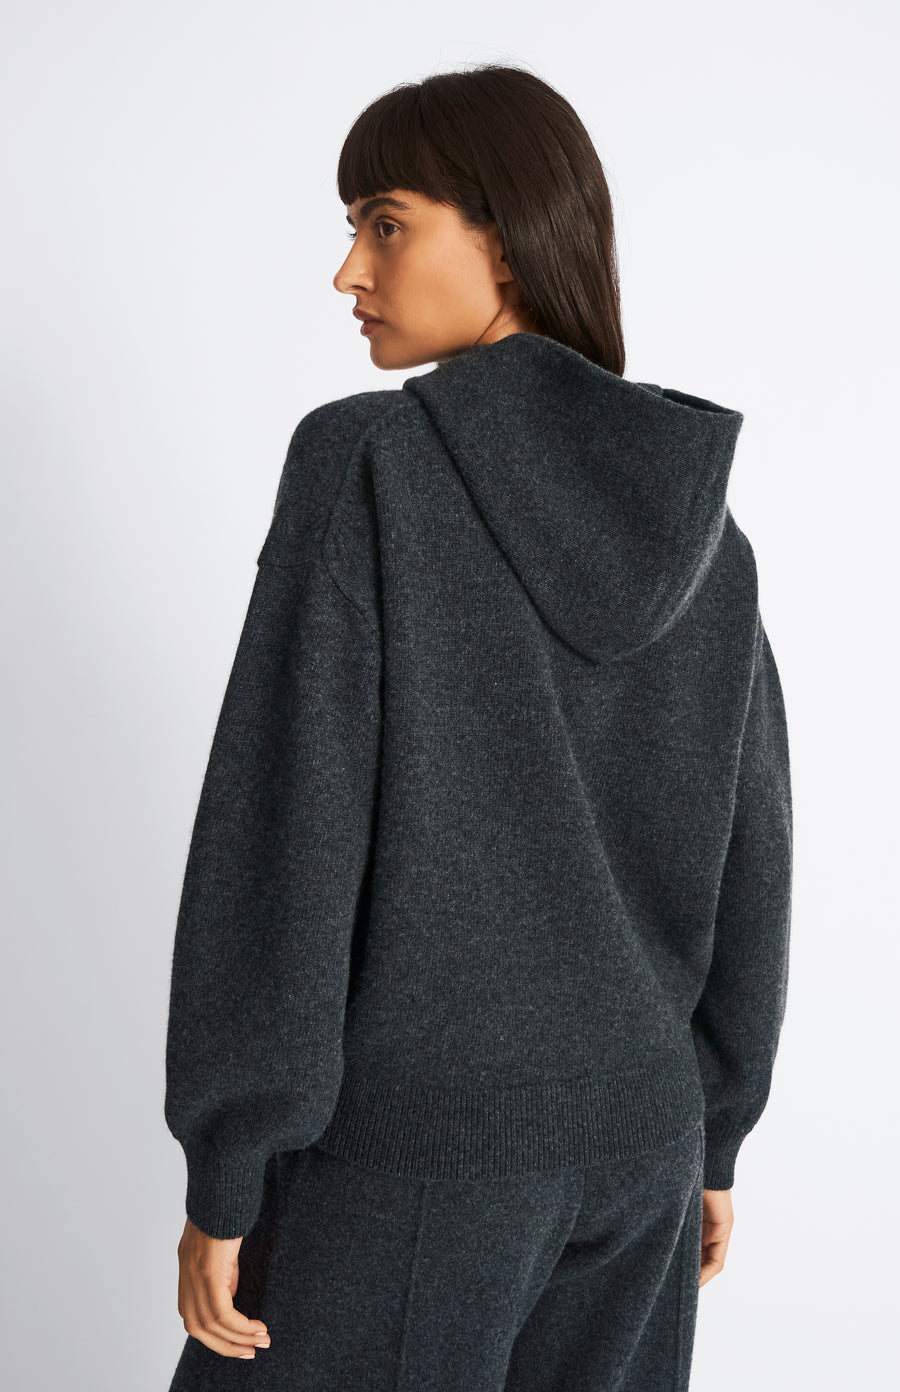 Pringle of Scotland Women's Cashmere Blend Hoodie In Charcoal back view